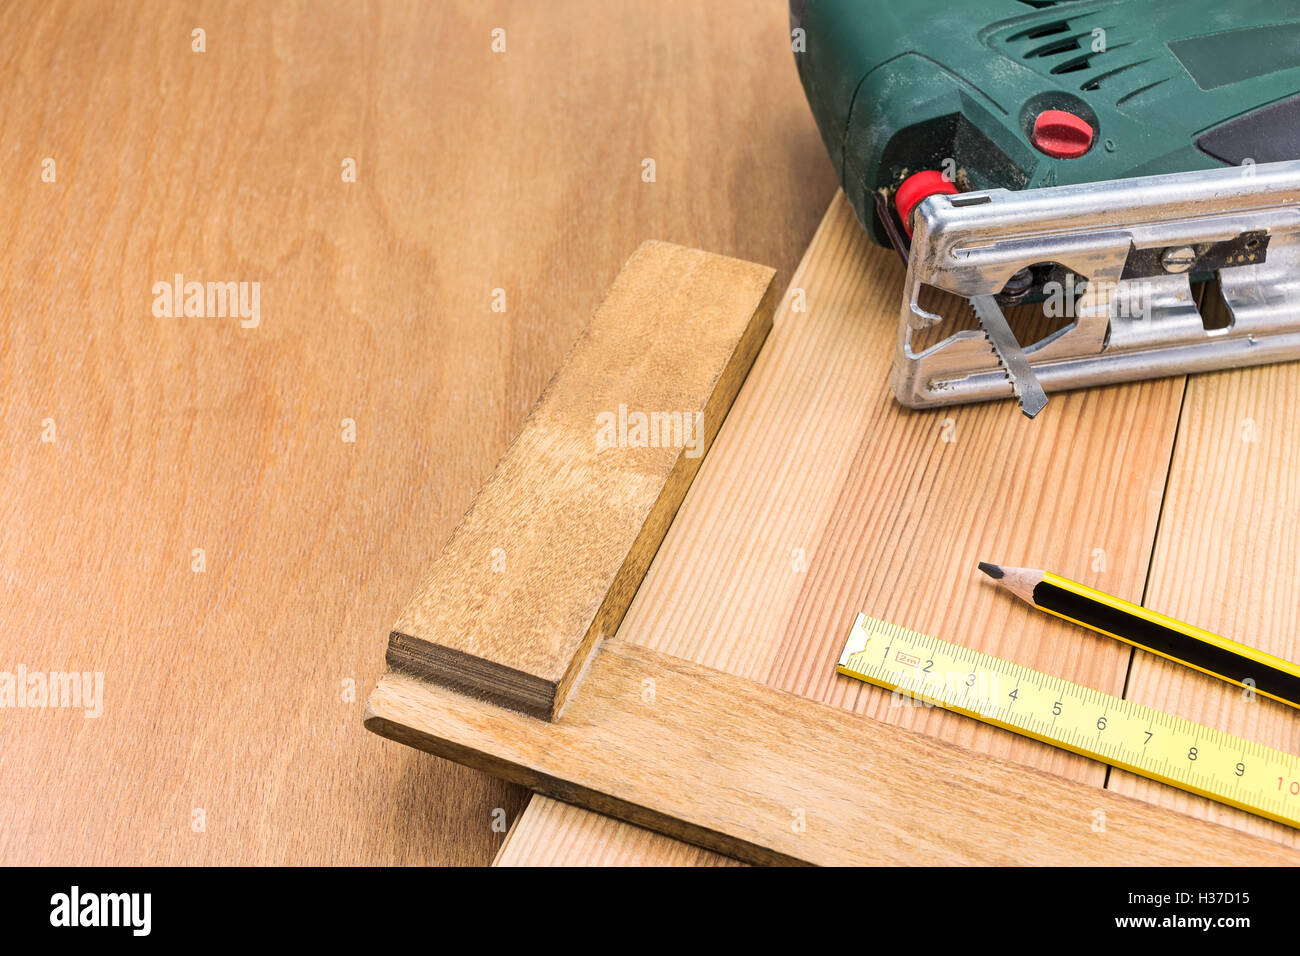 Carpenter's electric fret-saw tool on a workbench Stock Photo